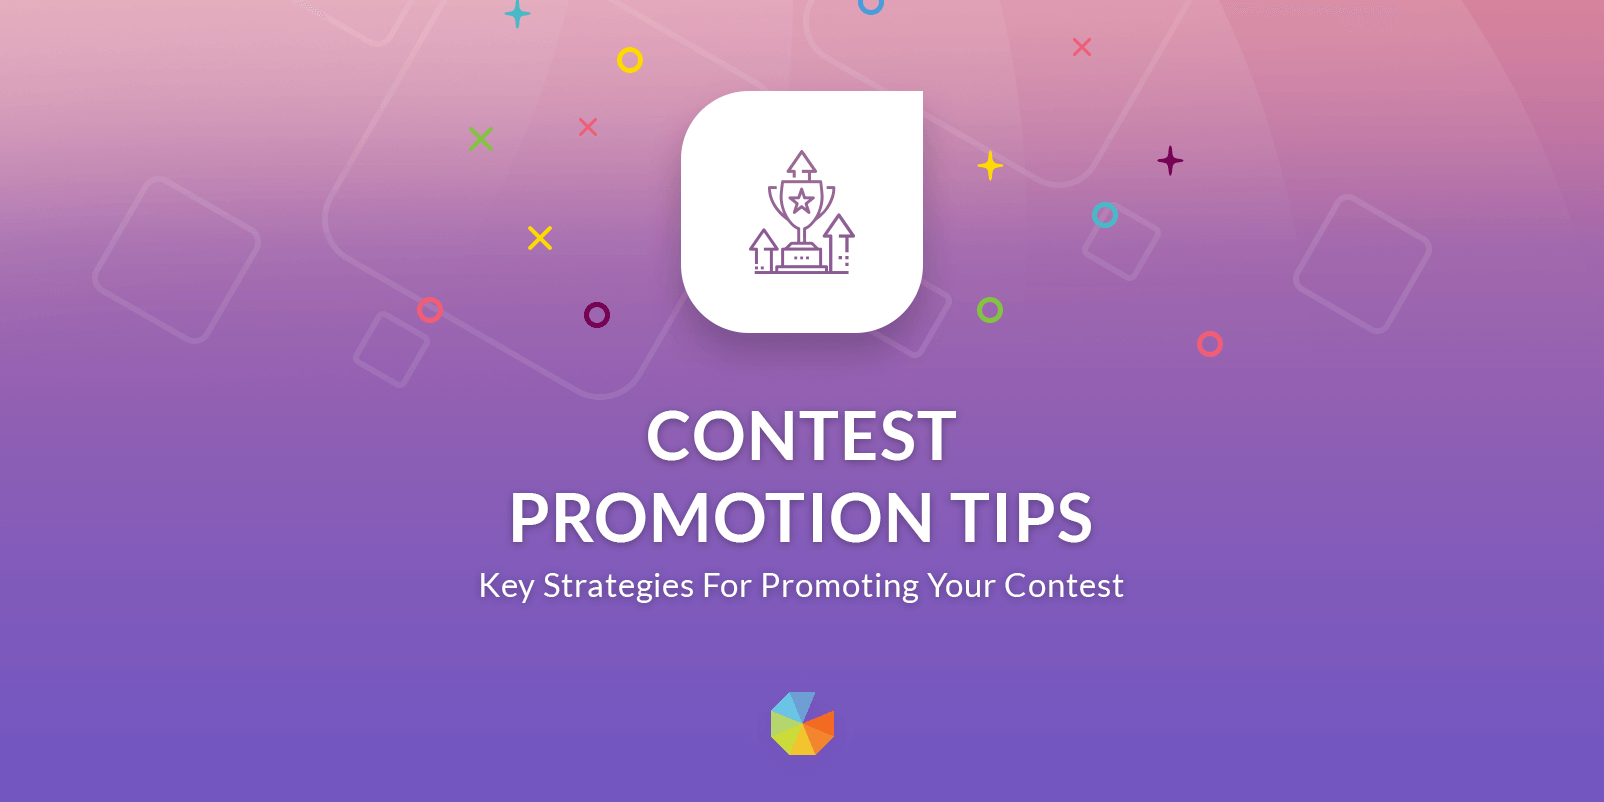 How to Promote Your Contest